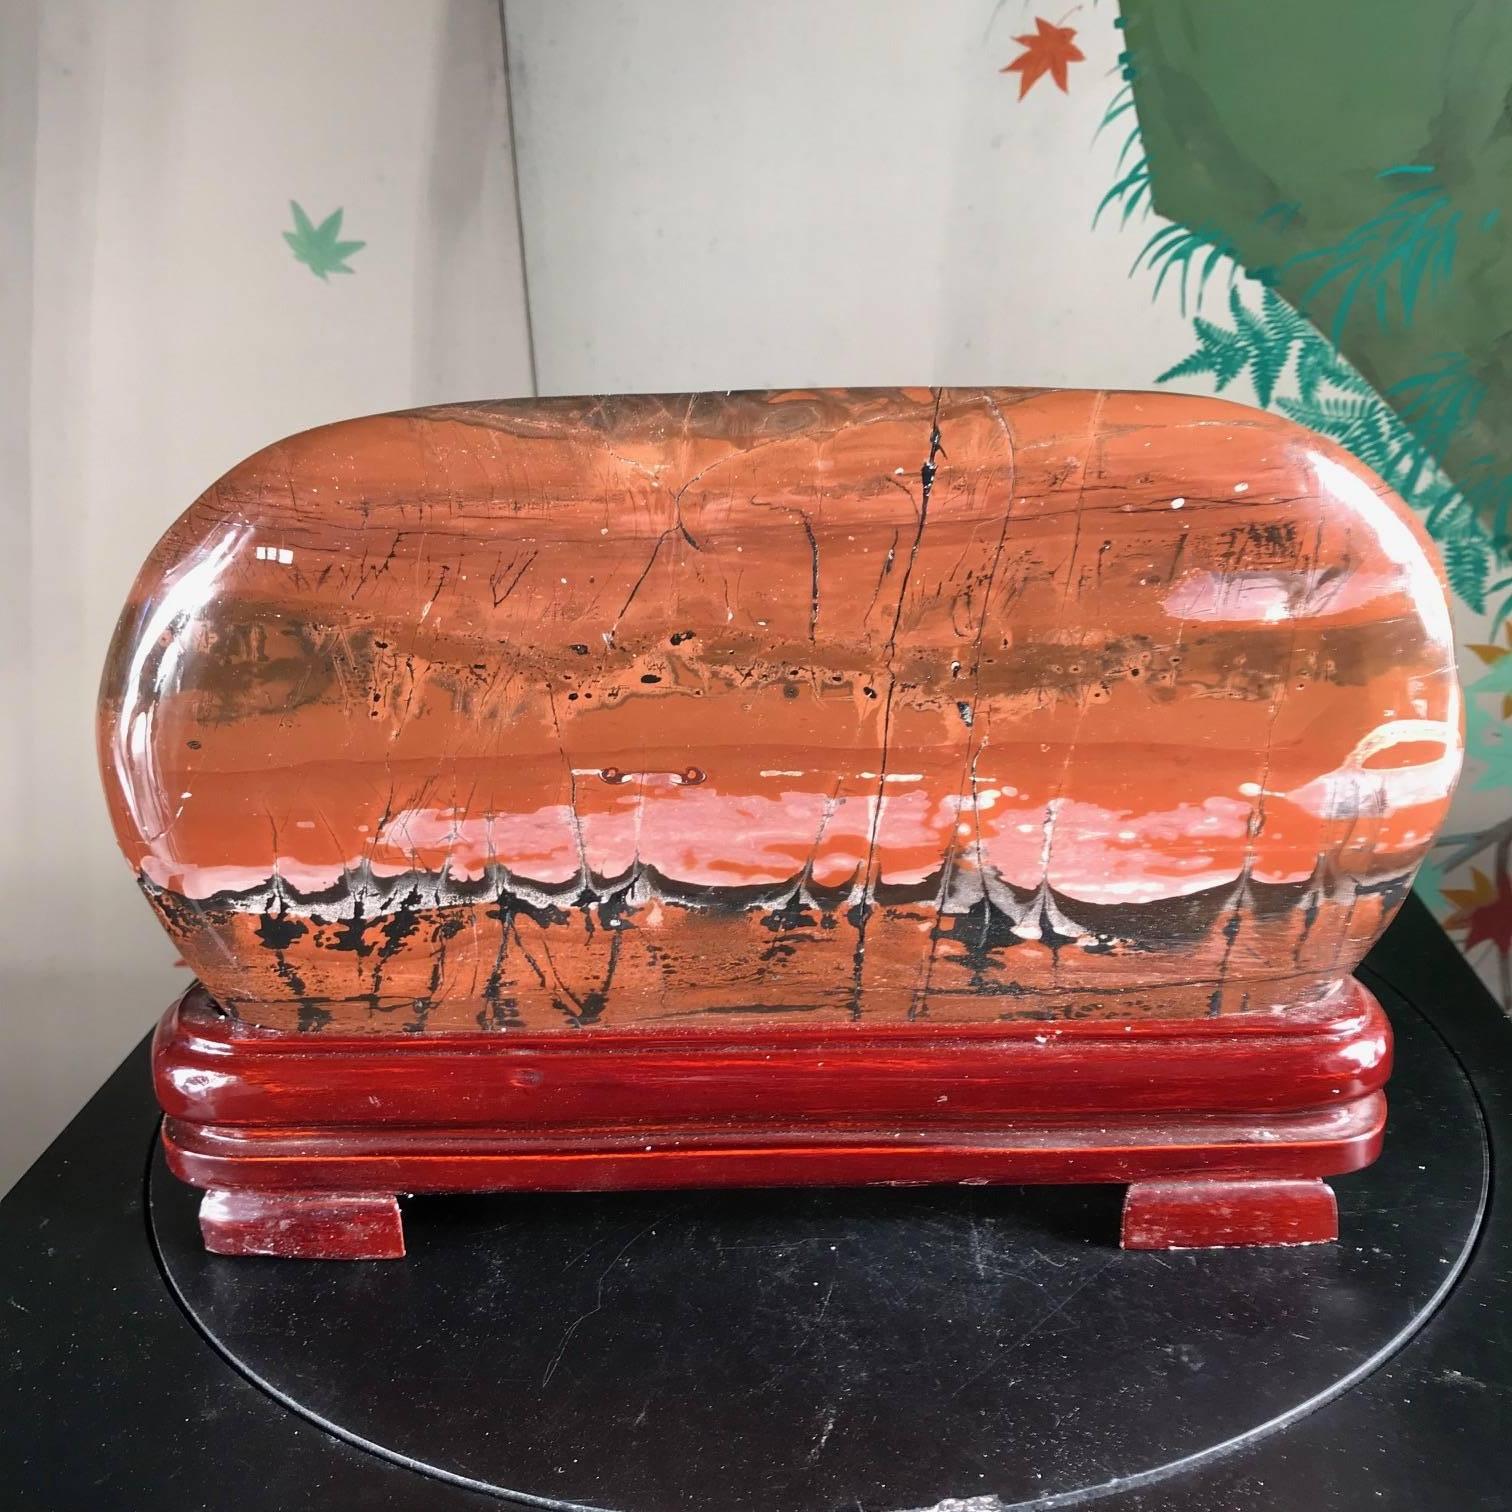 Chinese Fantastic Unique Natural Viewing Stone, Custom Wood Base, Fine Gift